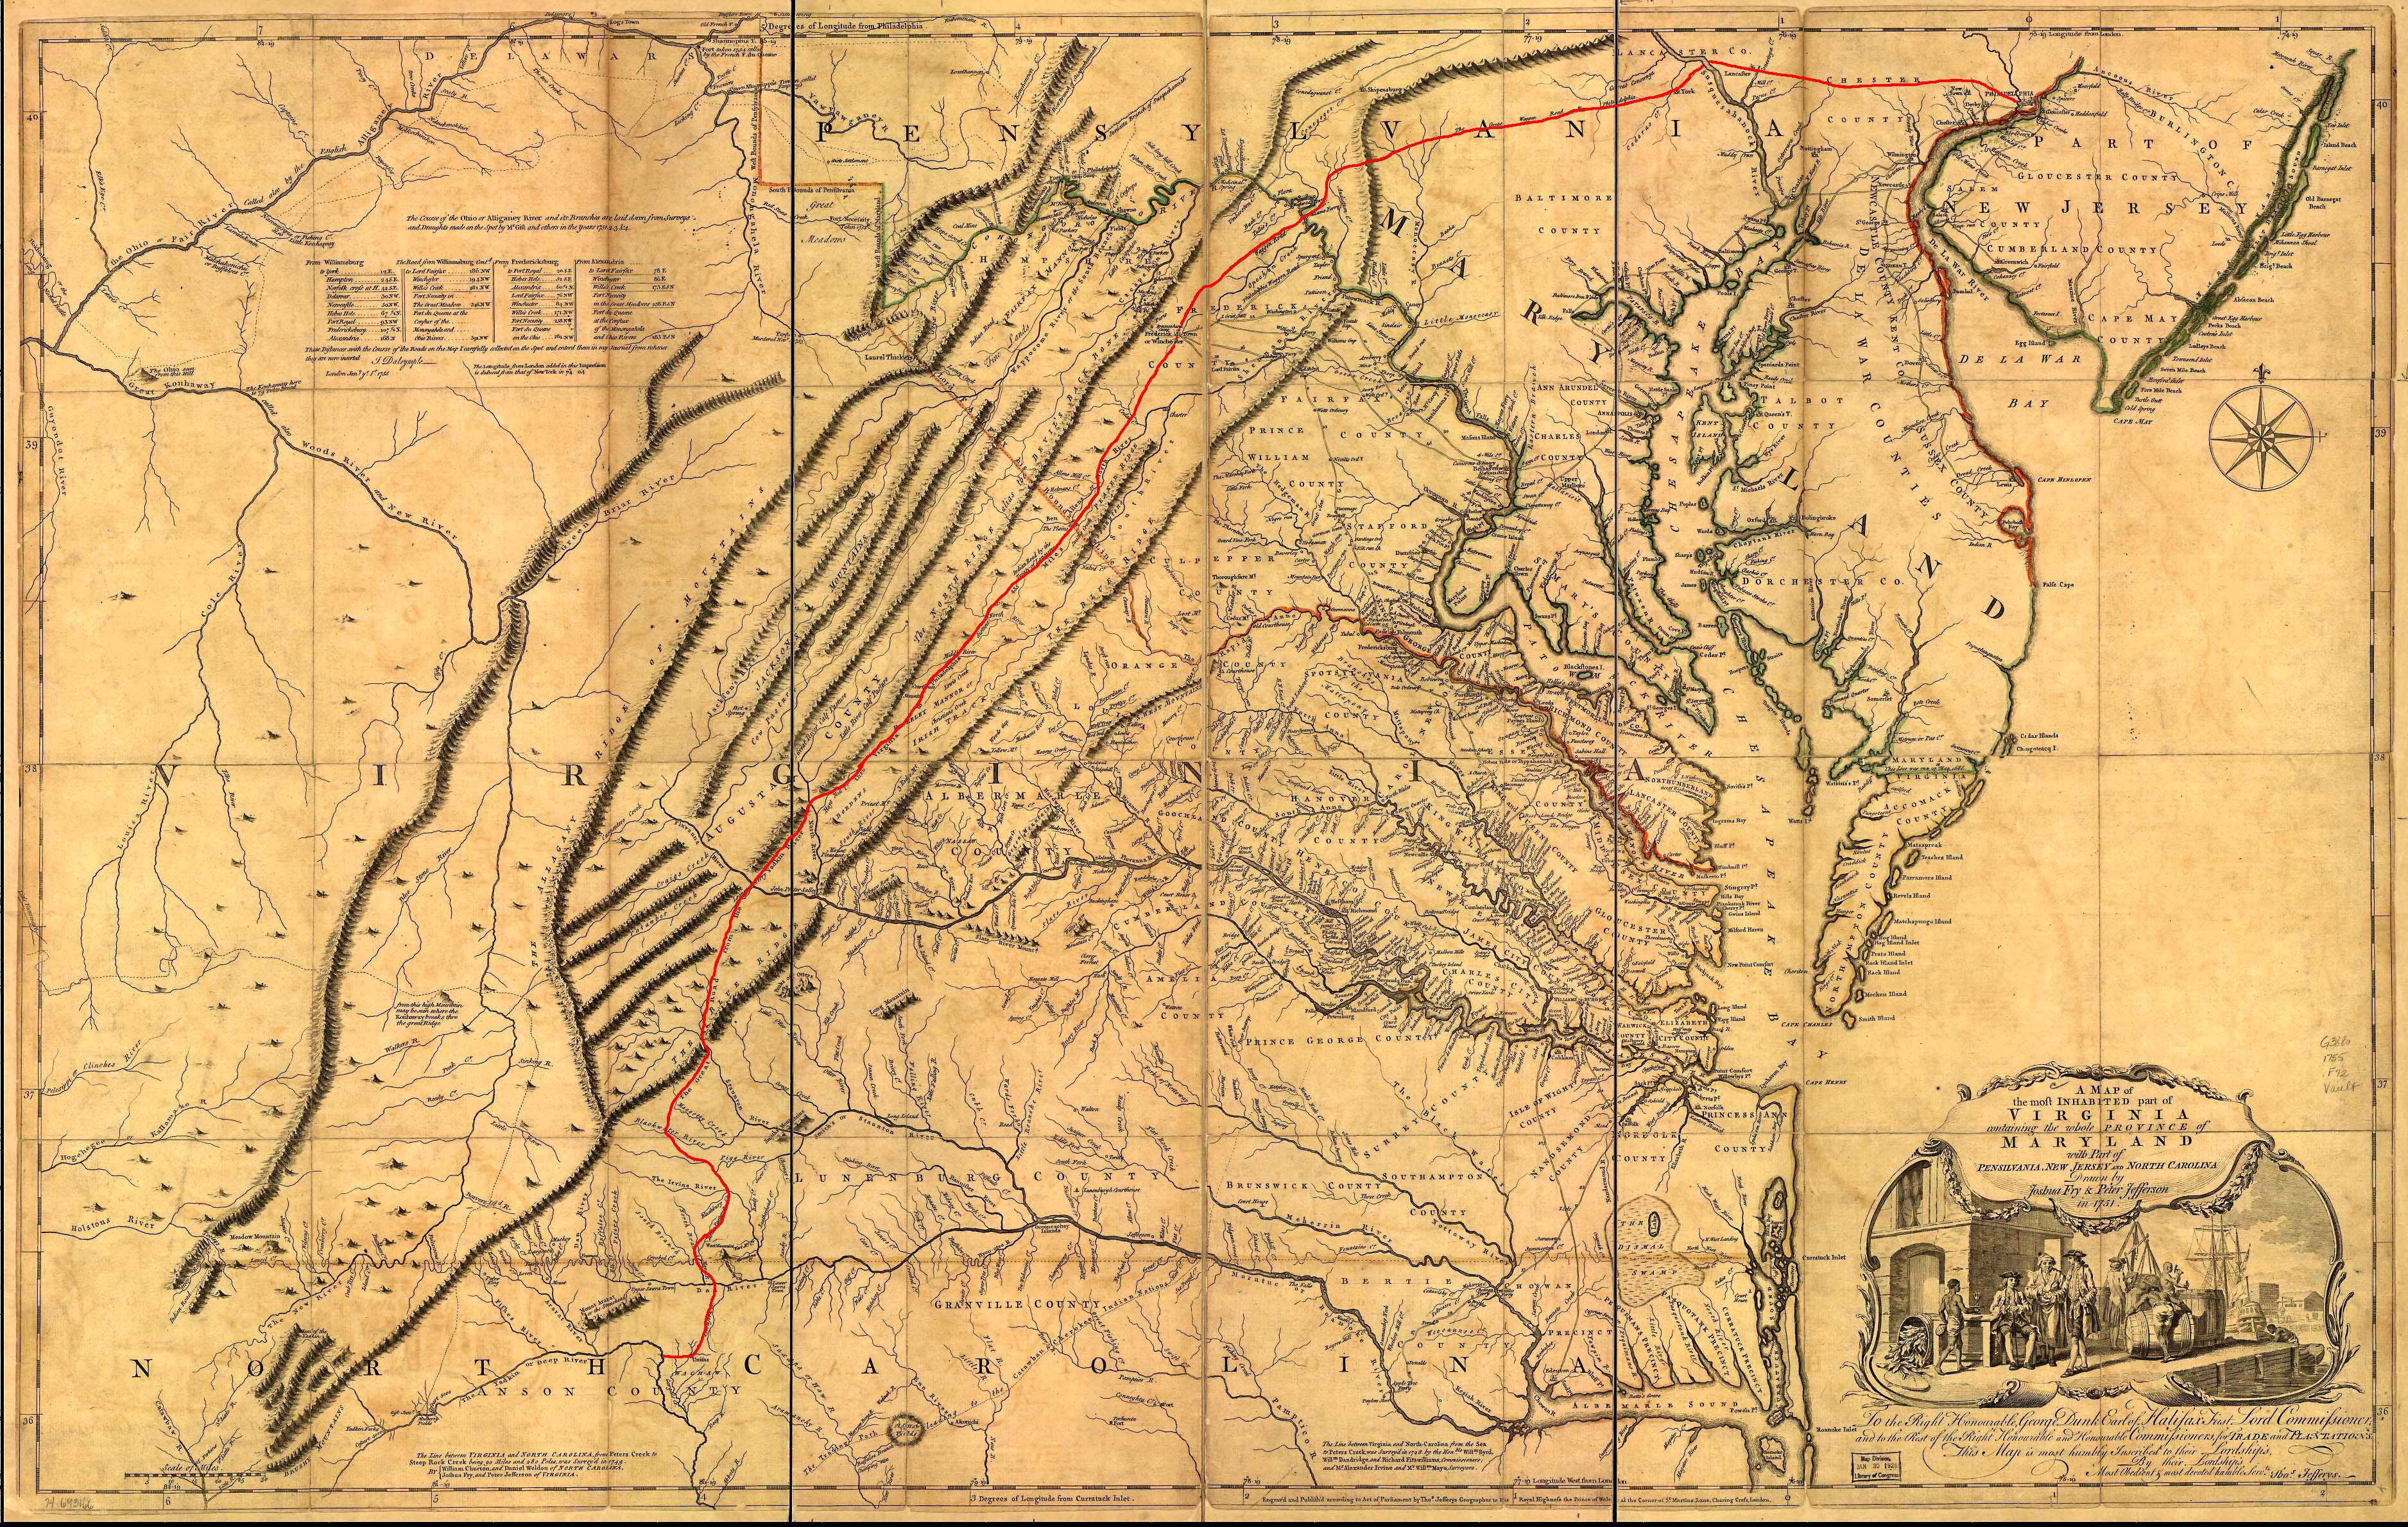 Tricities region shown on the Fry-Jefferson map (1752)